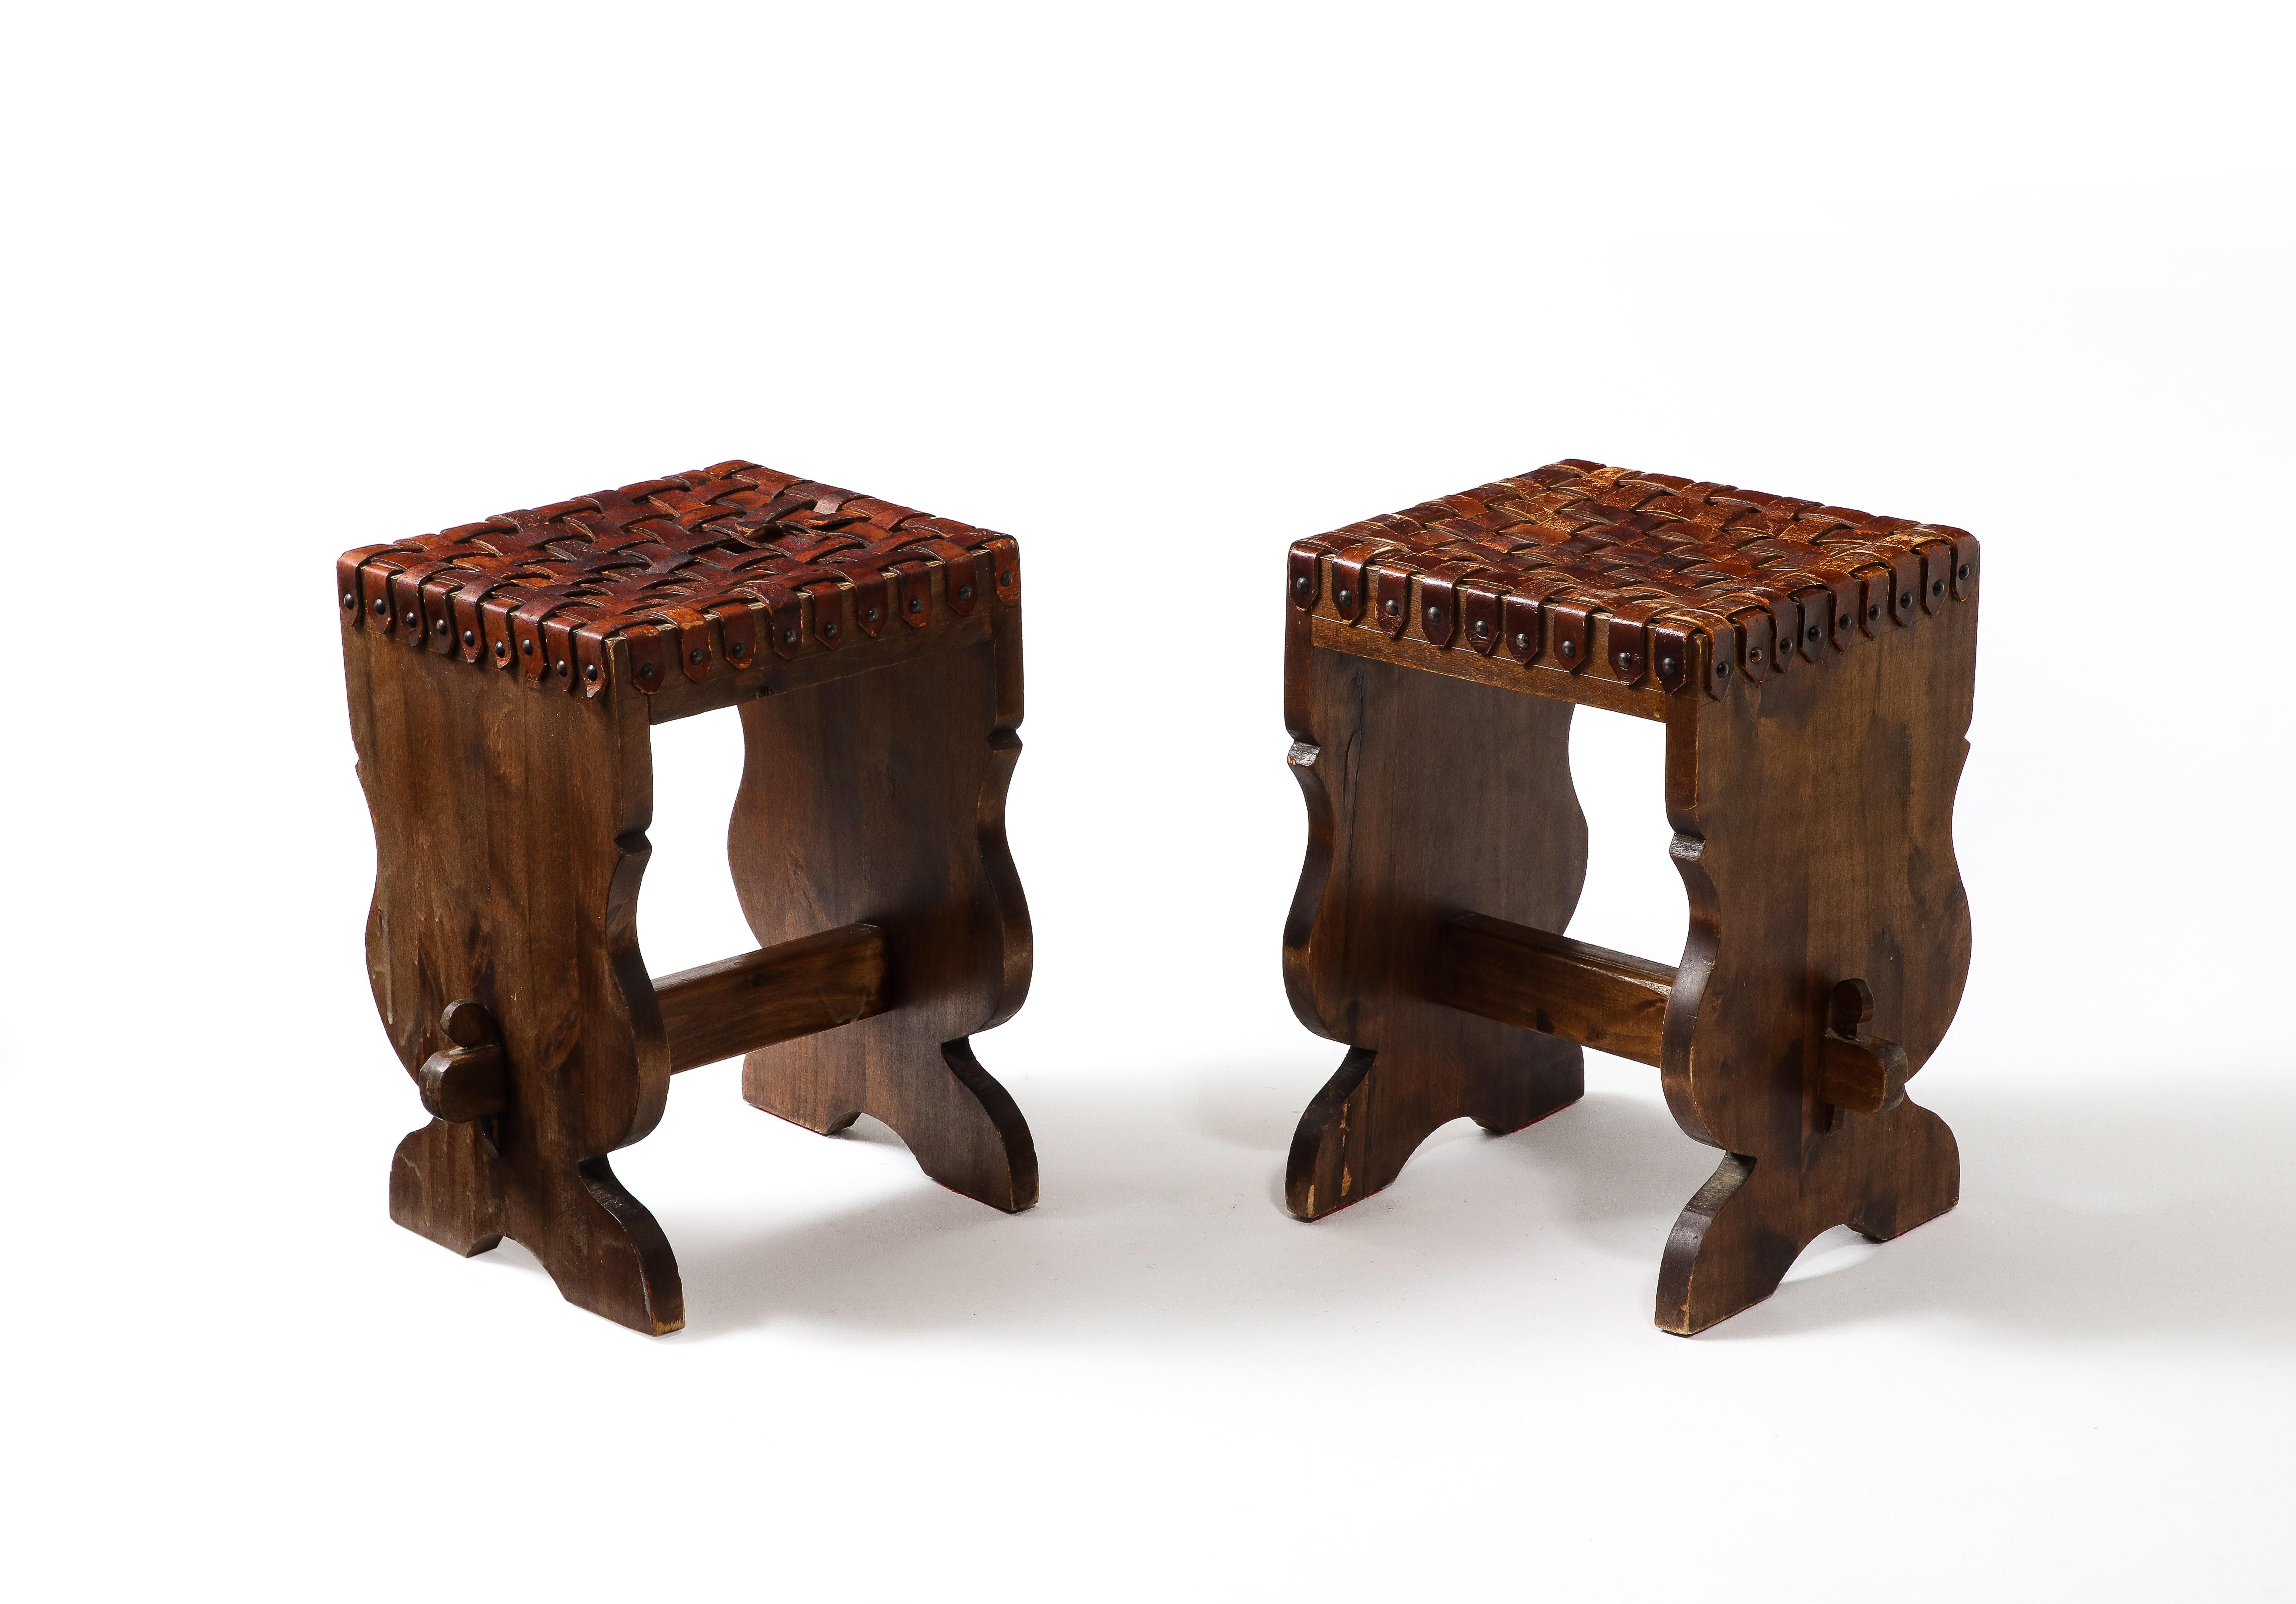 Woven leather and elm stools with nailheads.
